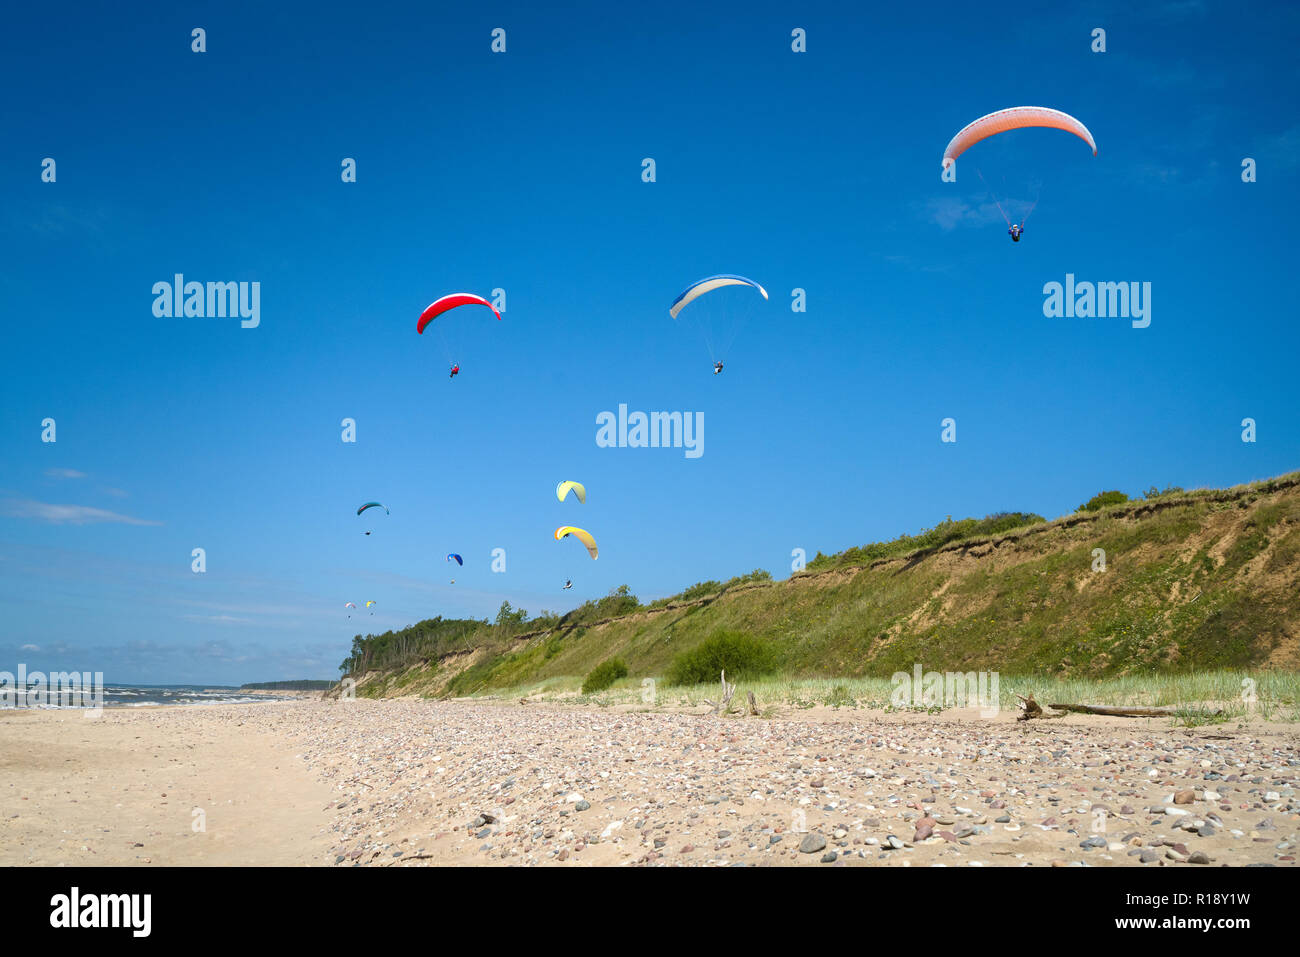 Paragliding in dynamic wind along the dunes in the beach Stock Photo